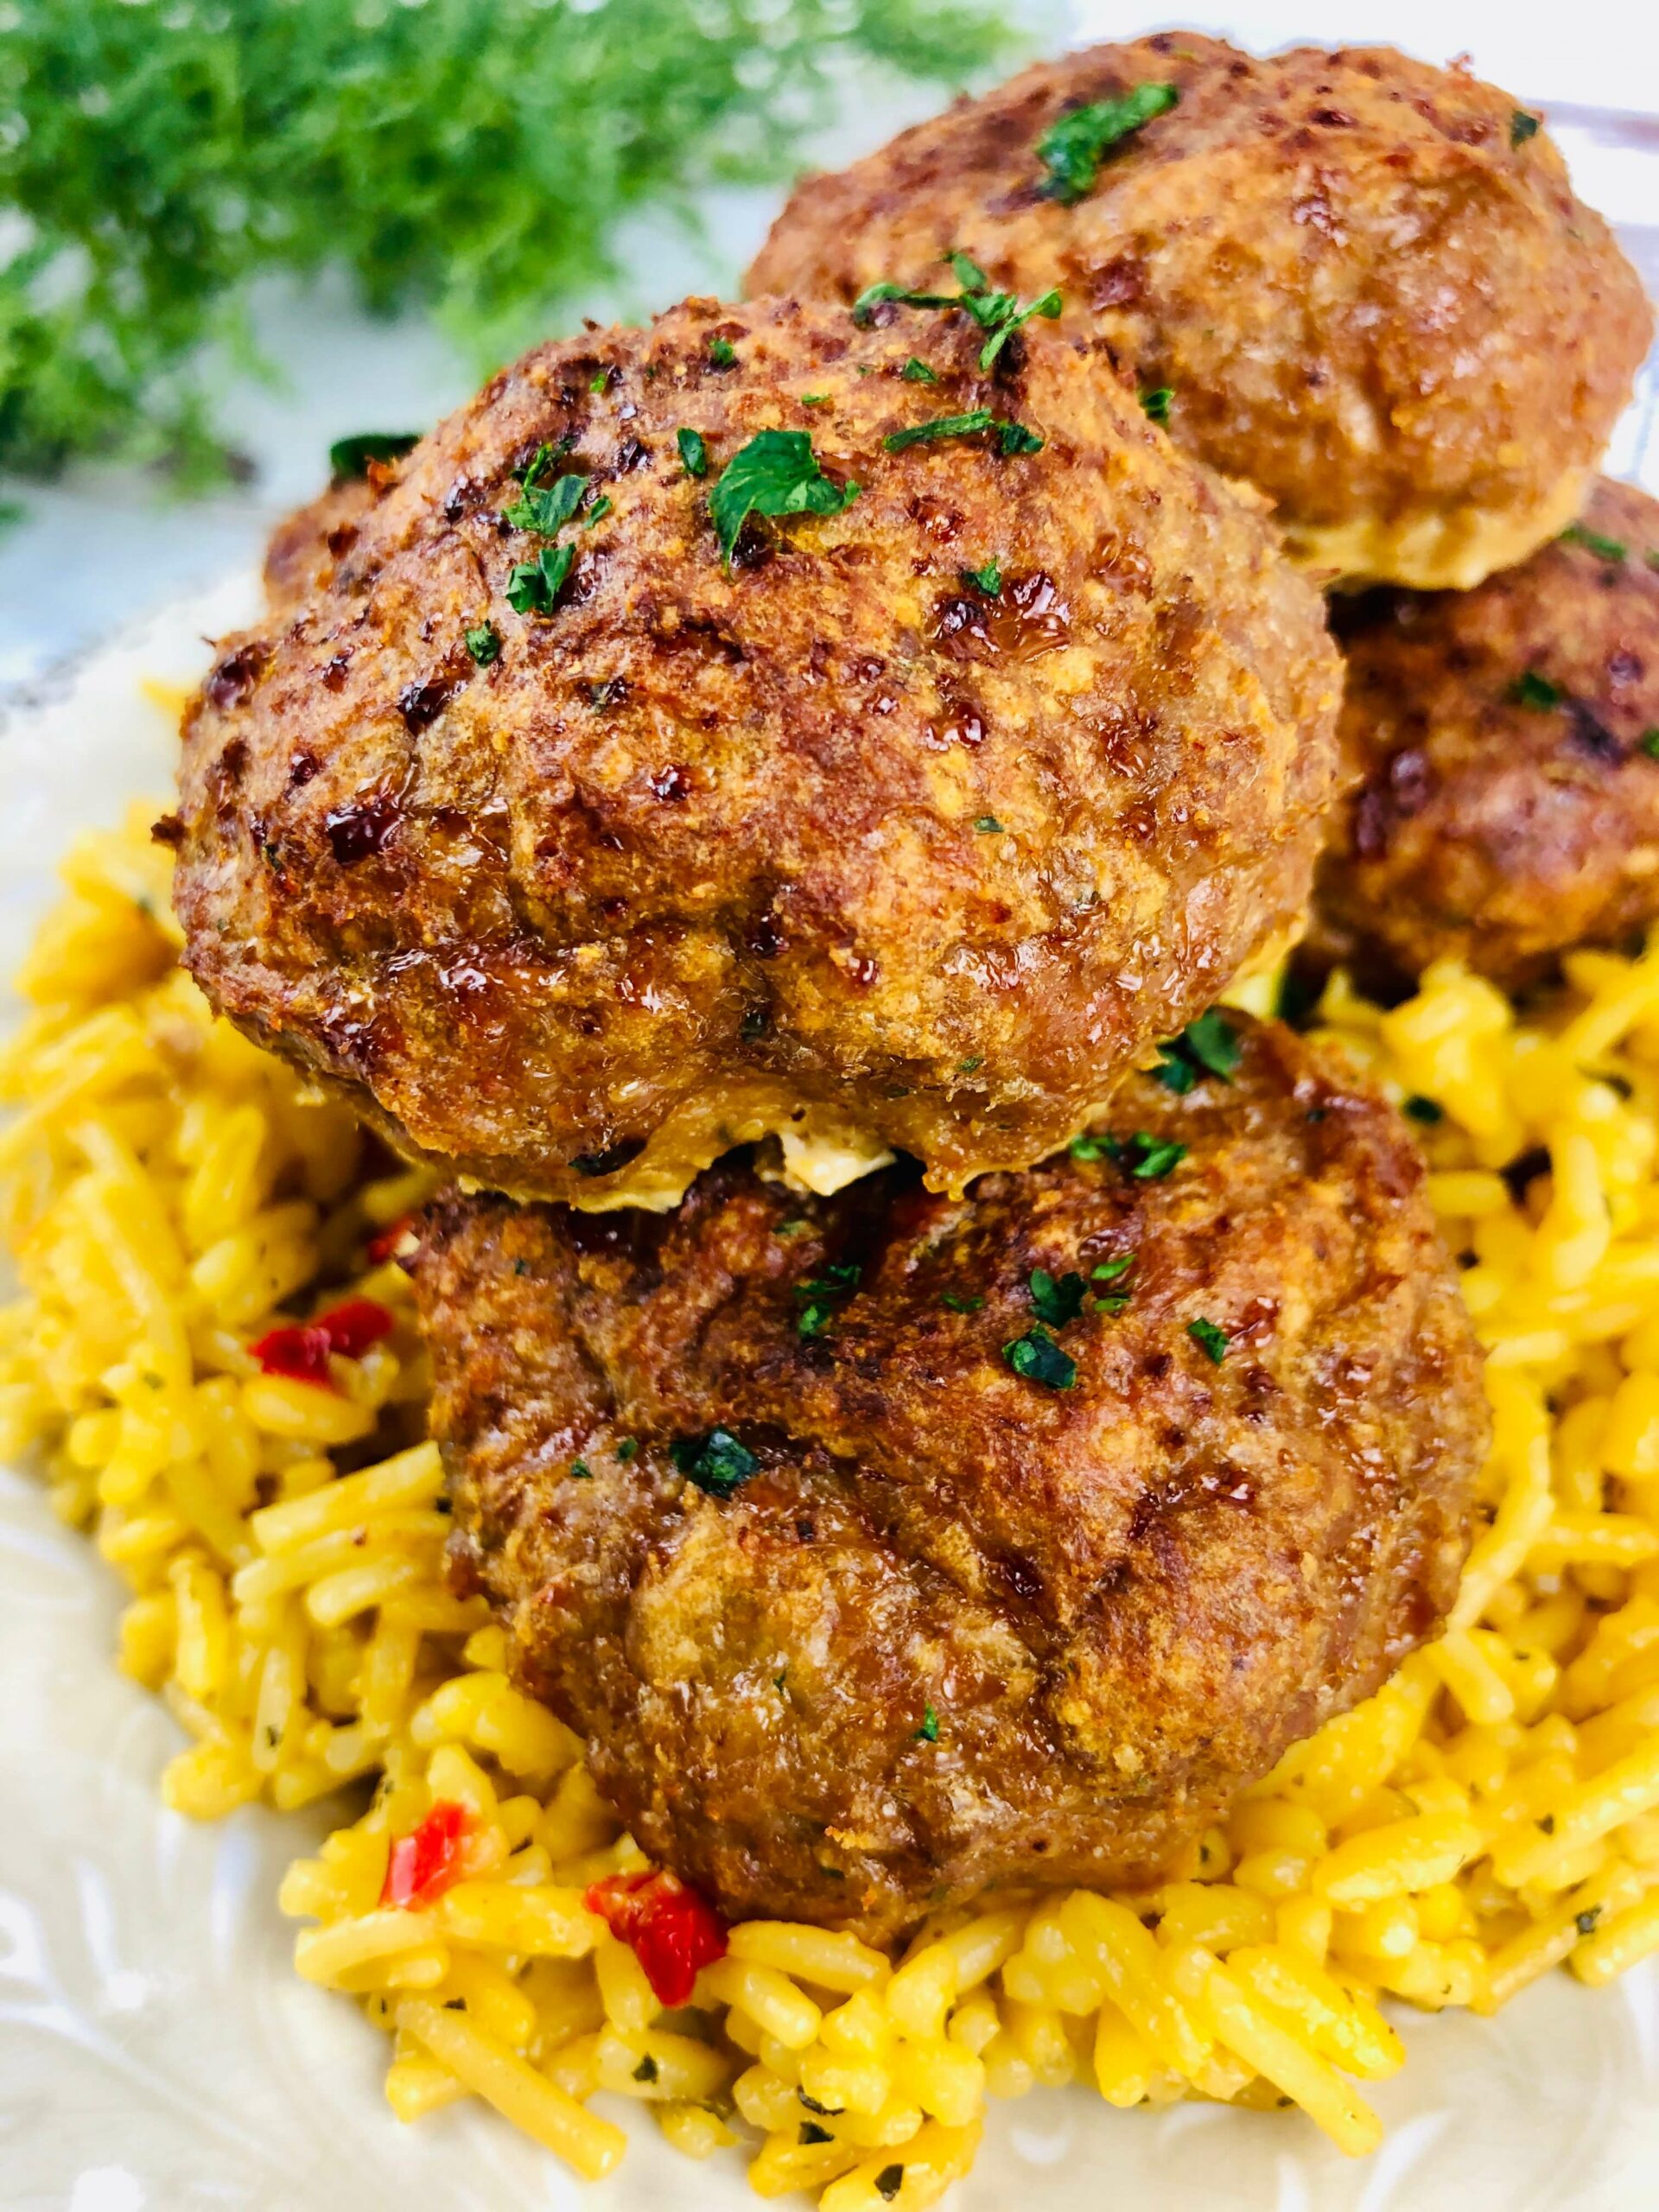 Taco Stuffed Meatballs on a bed of Mexican rice.